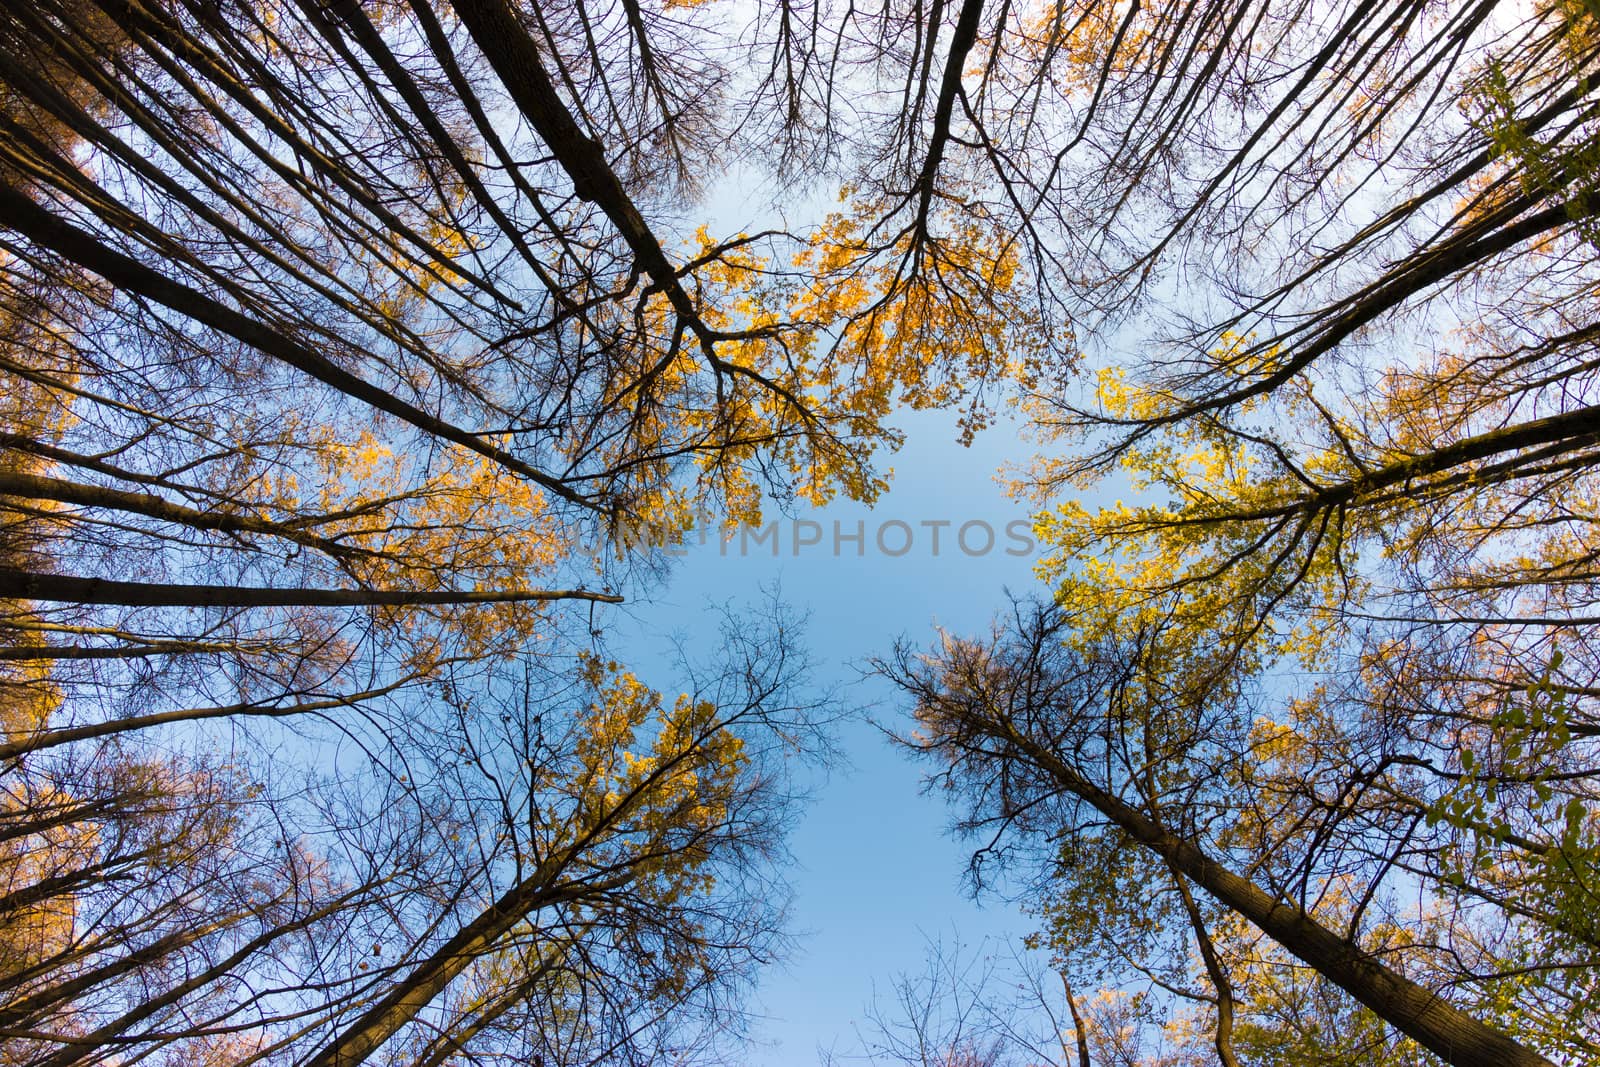 Autumn tree tops. golden leaves and blue sky